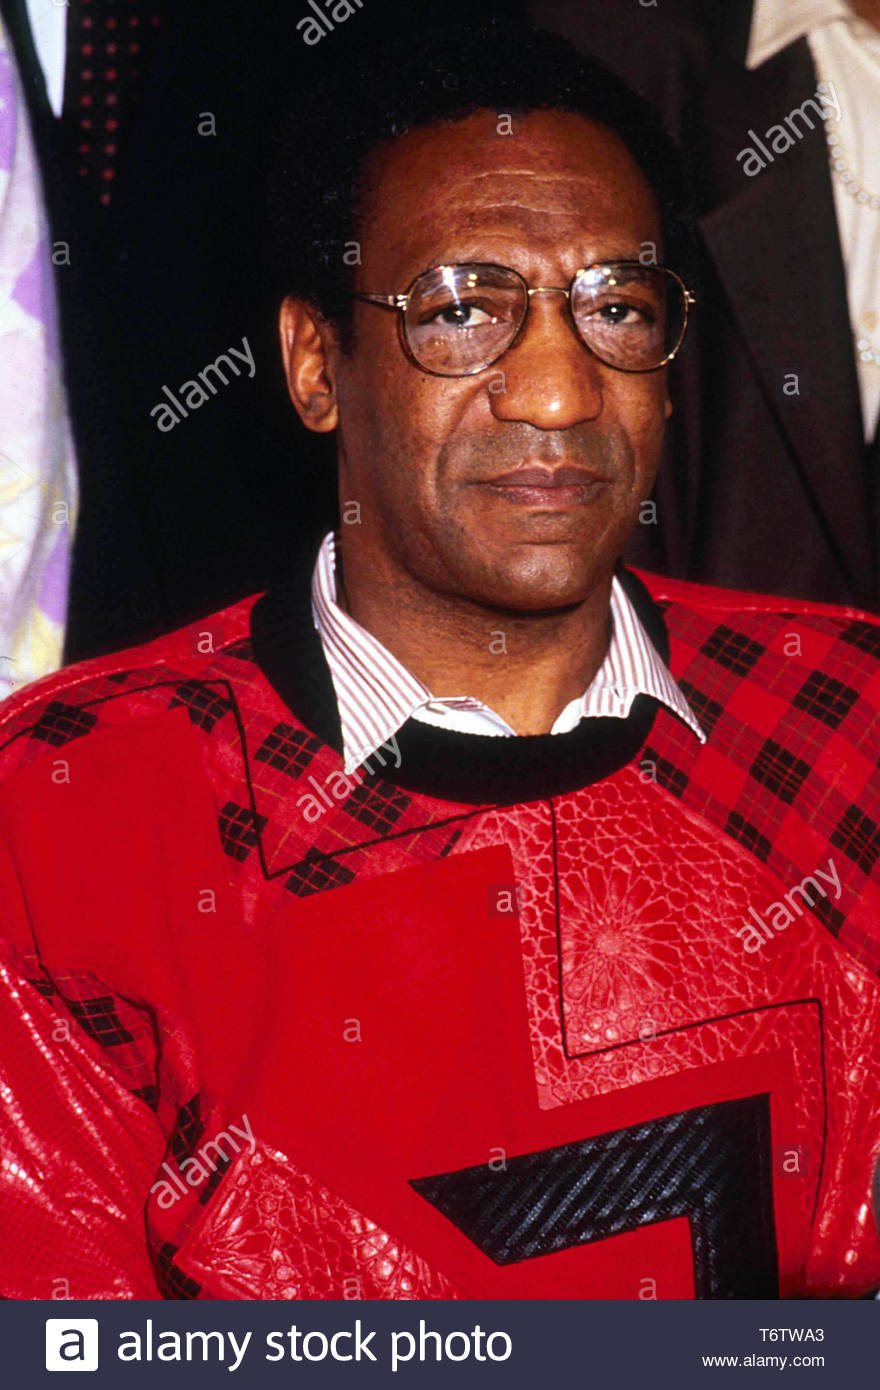 a-color-photo-of-a-close-up-of-bill-cosby-looking-at-the-camera-and-wearing-a-red-plaid-sweater-about-to-receive-the-medgar-evers-award-on-2-28-1986-credit-2096037globe-photosmediapunch-T6TWA3.jpg